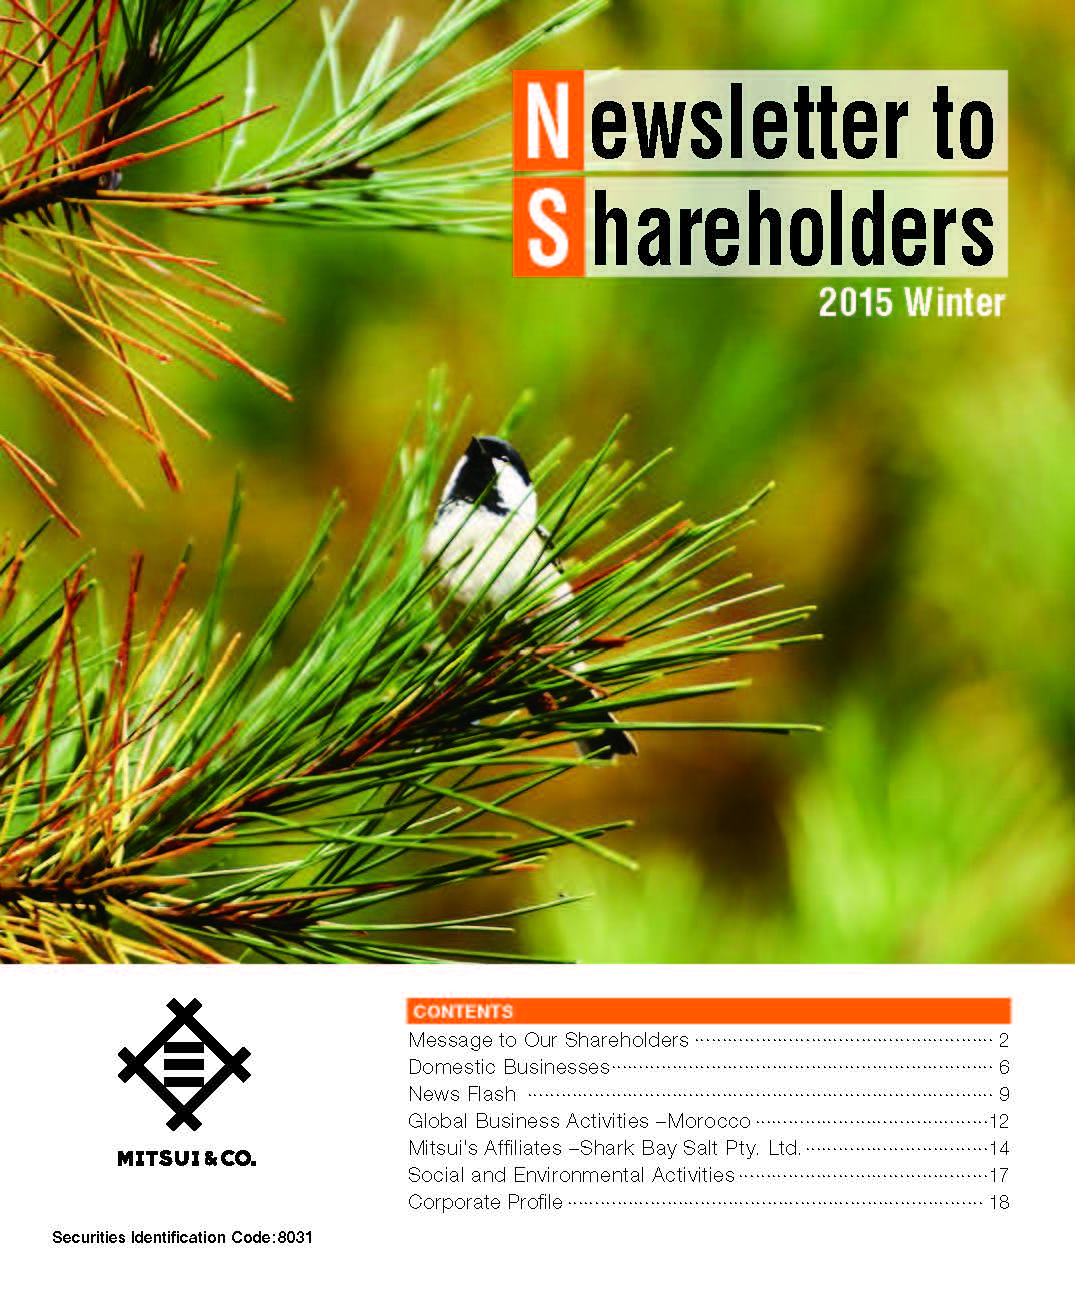 2015 Winter (Date of Issue: November 20, 2015)